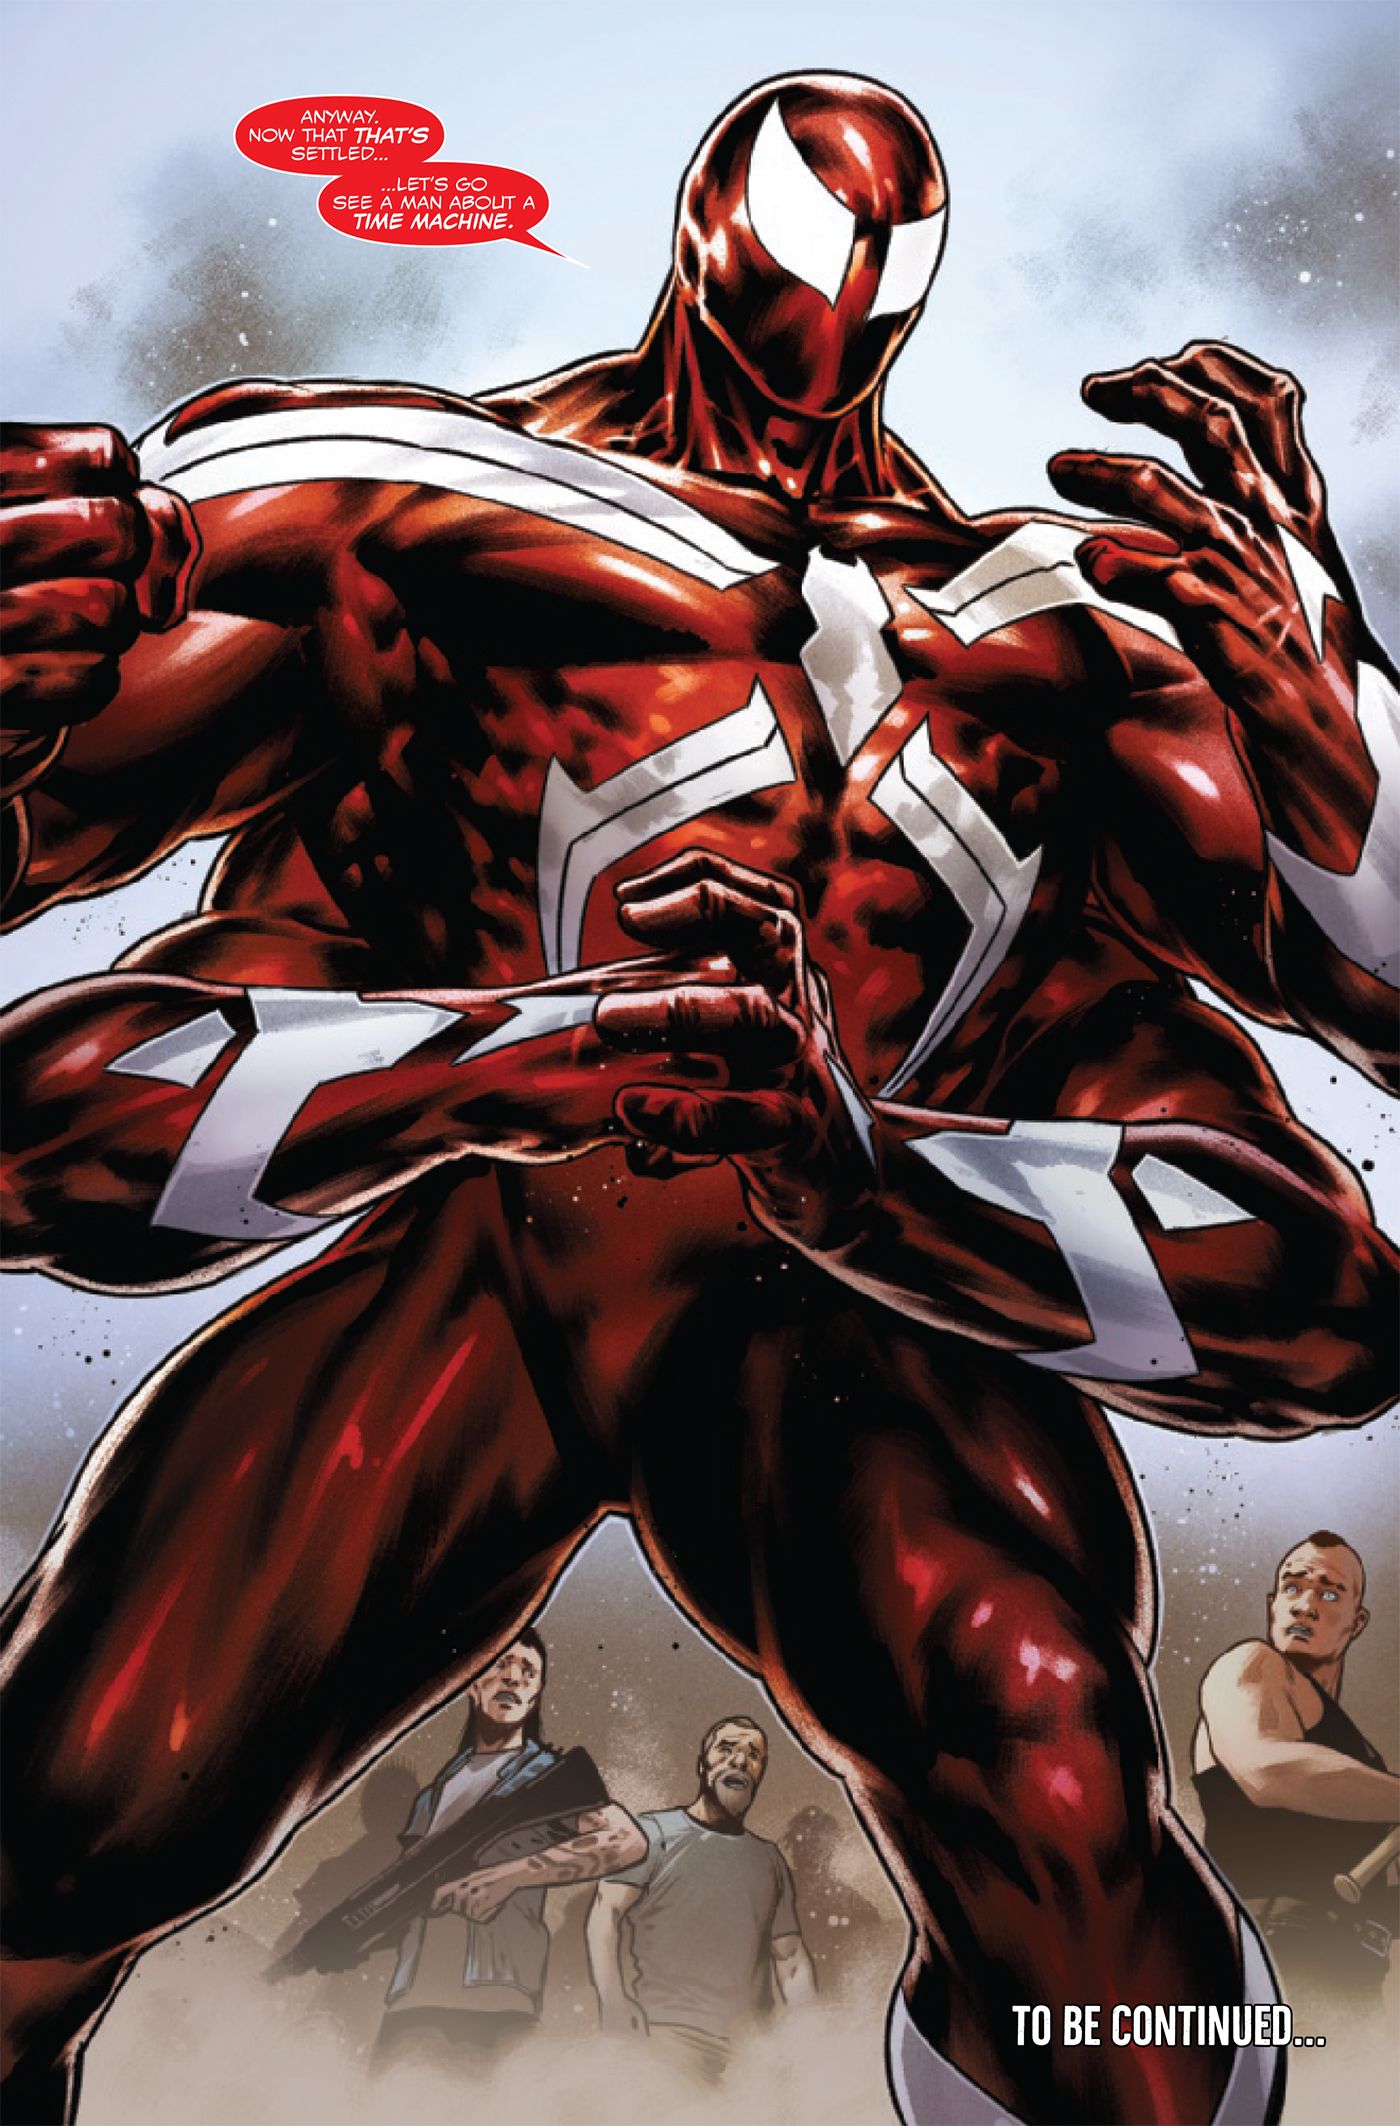 Eddie Brock and Bedlam merge into a giant red symbiote with four arms in Venom #21 (2023).